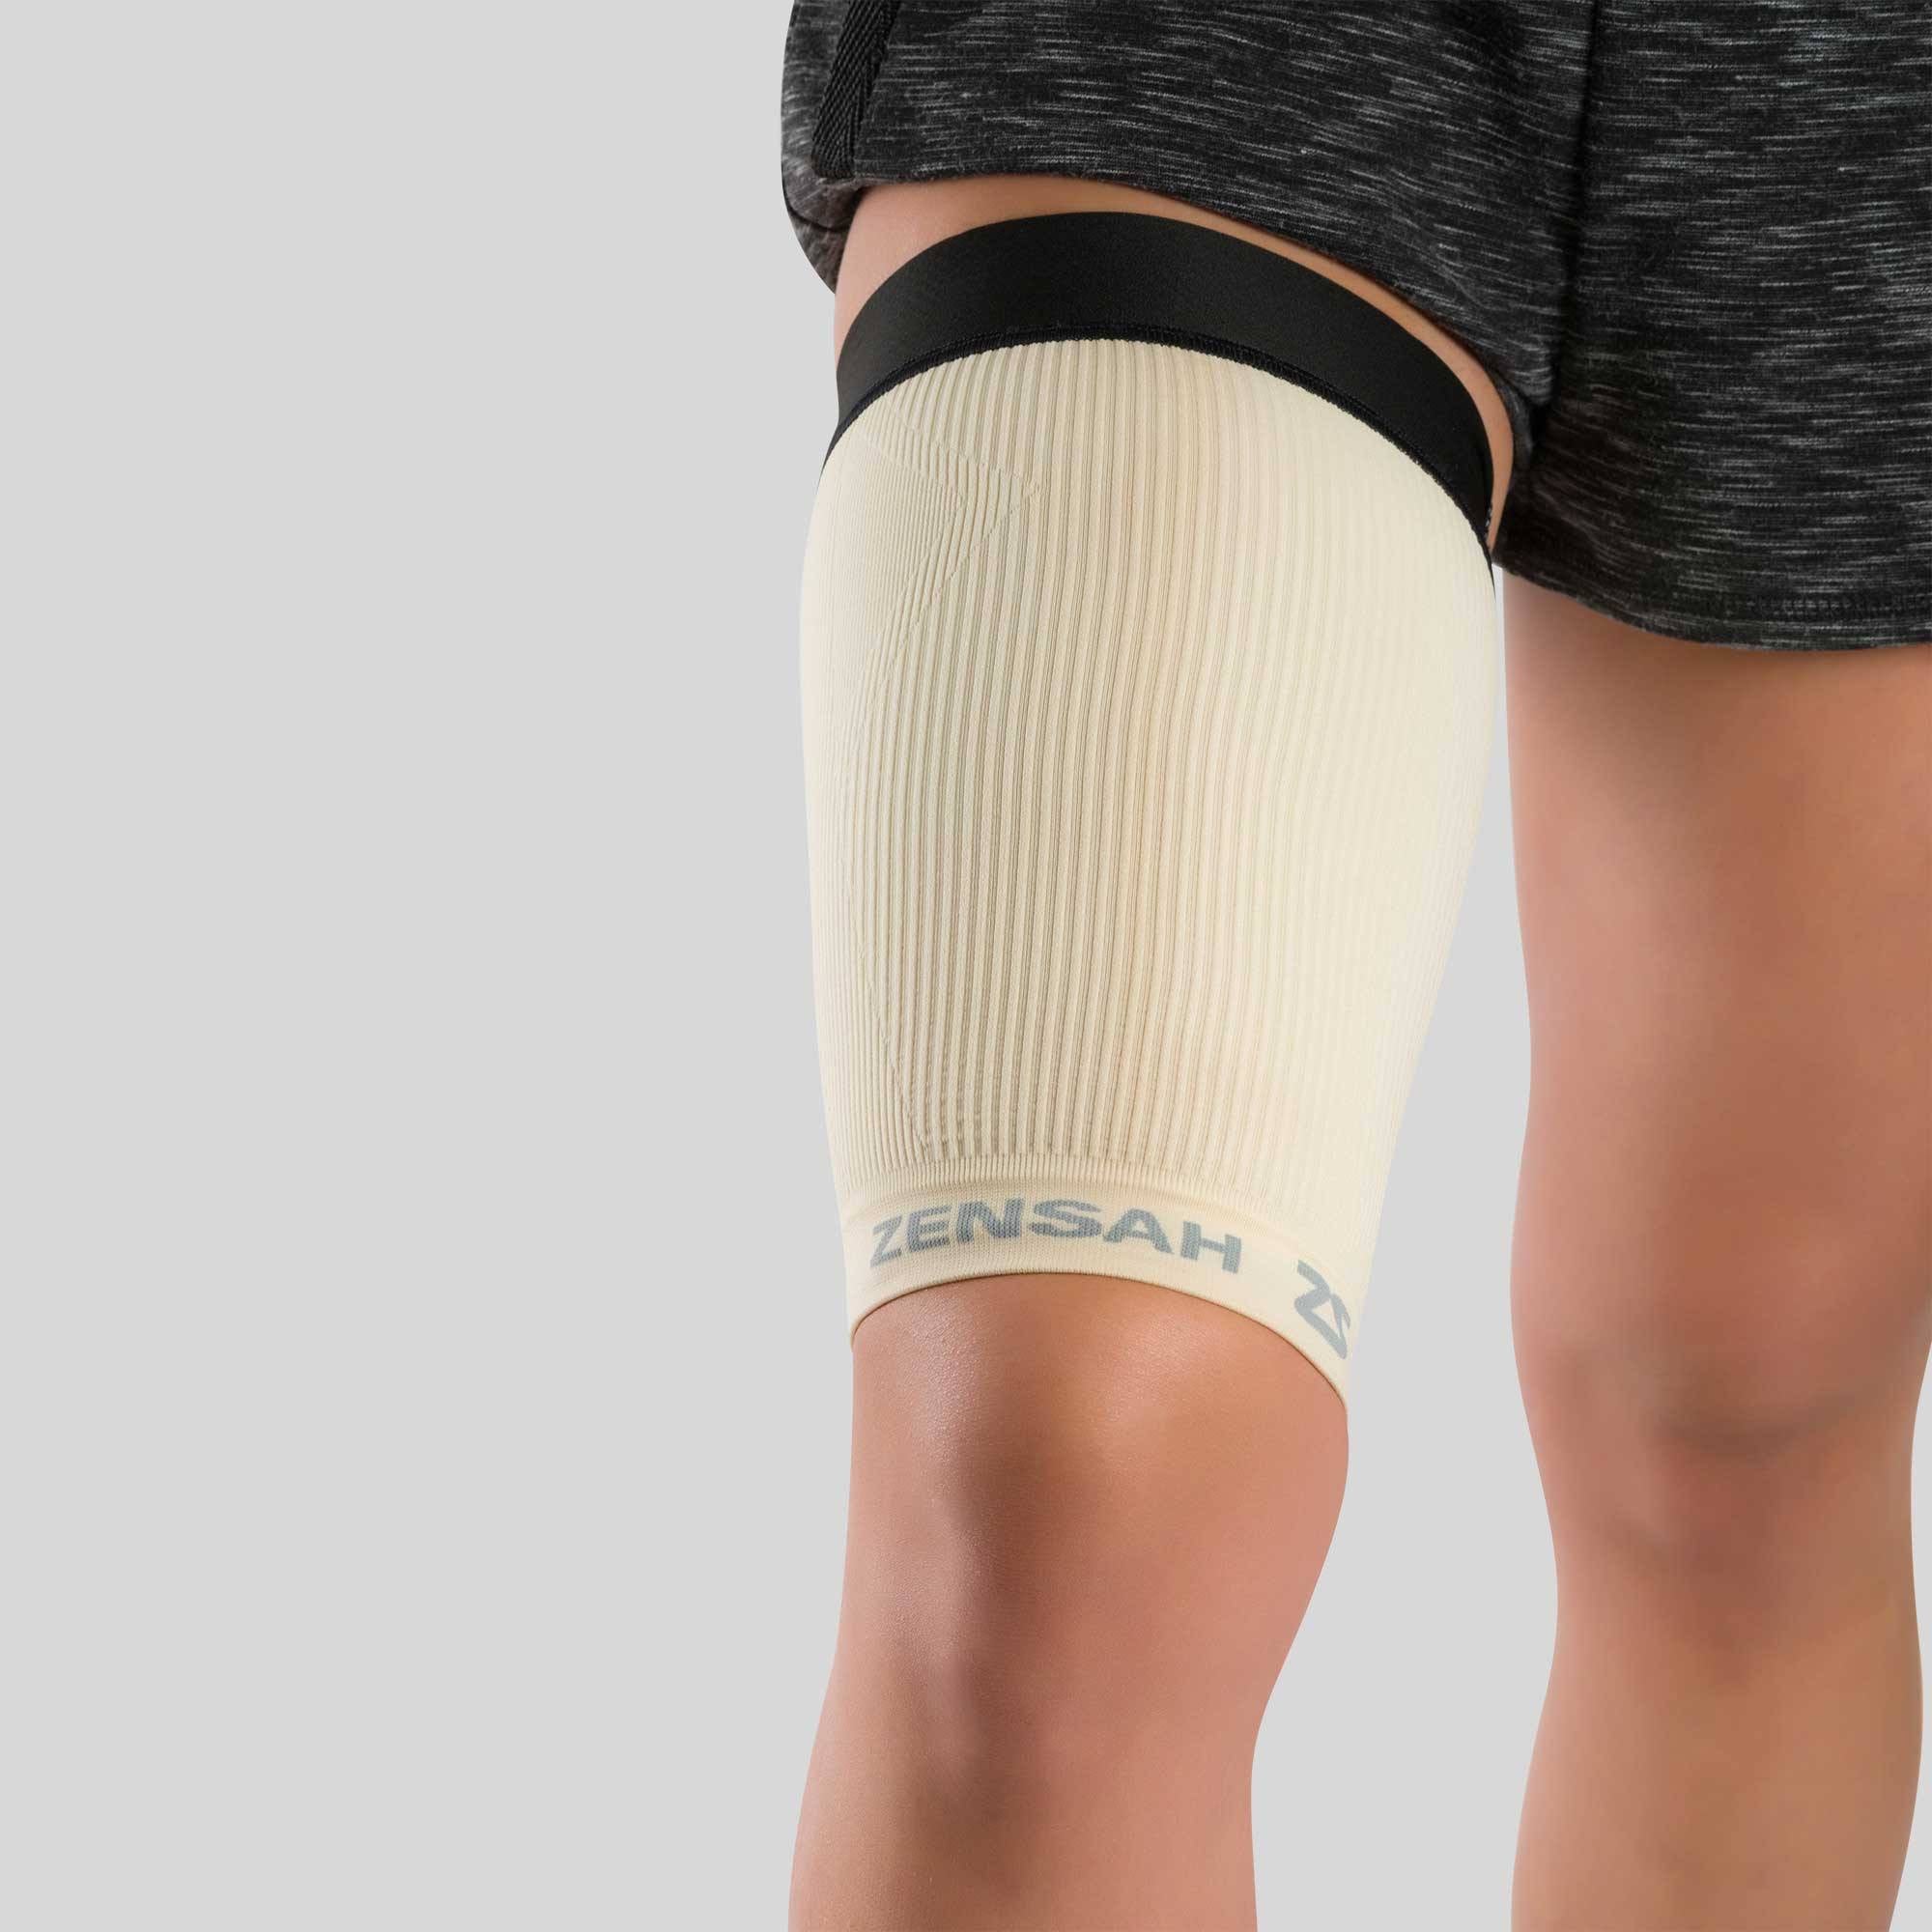 Thigh Compression Sleeve - Hamstring Compression Sleeve (Pair) for